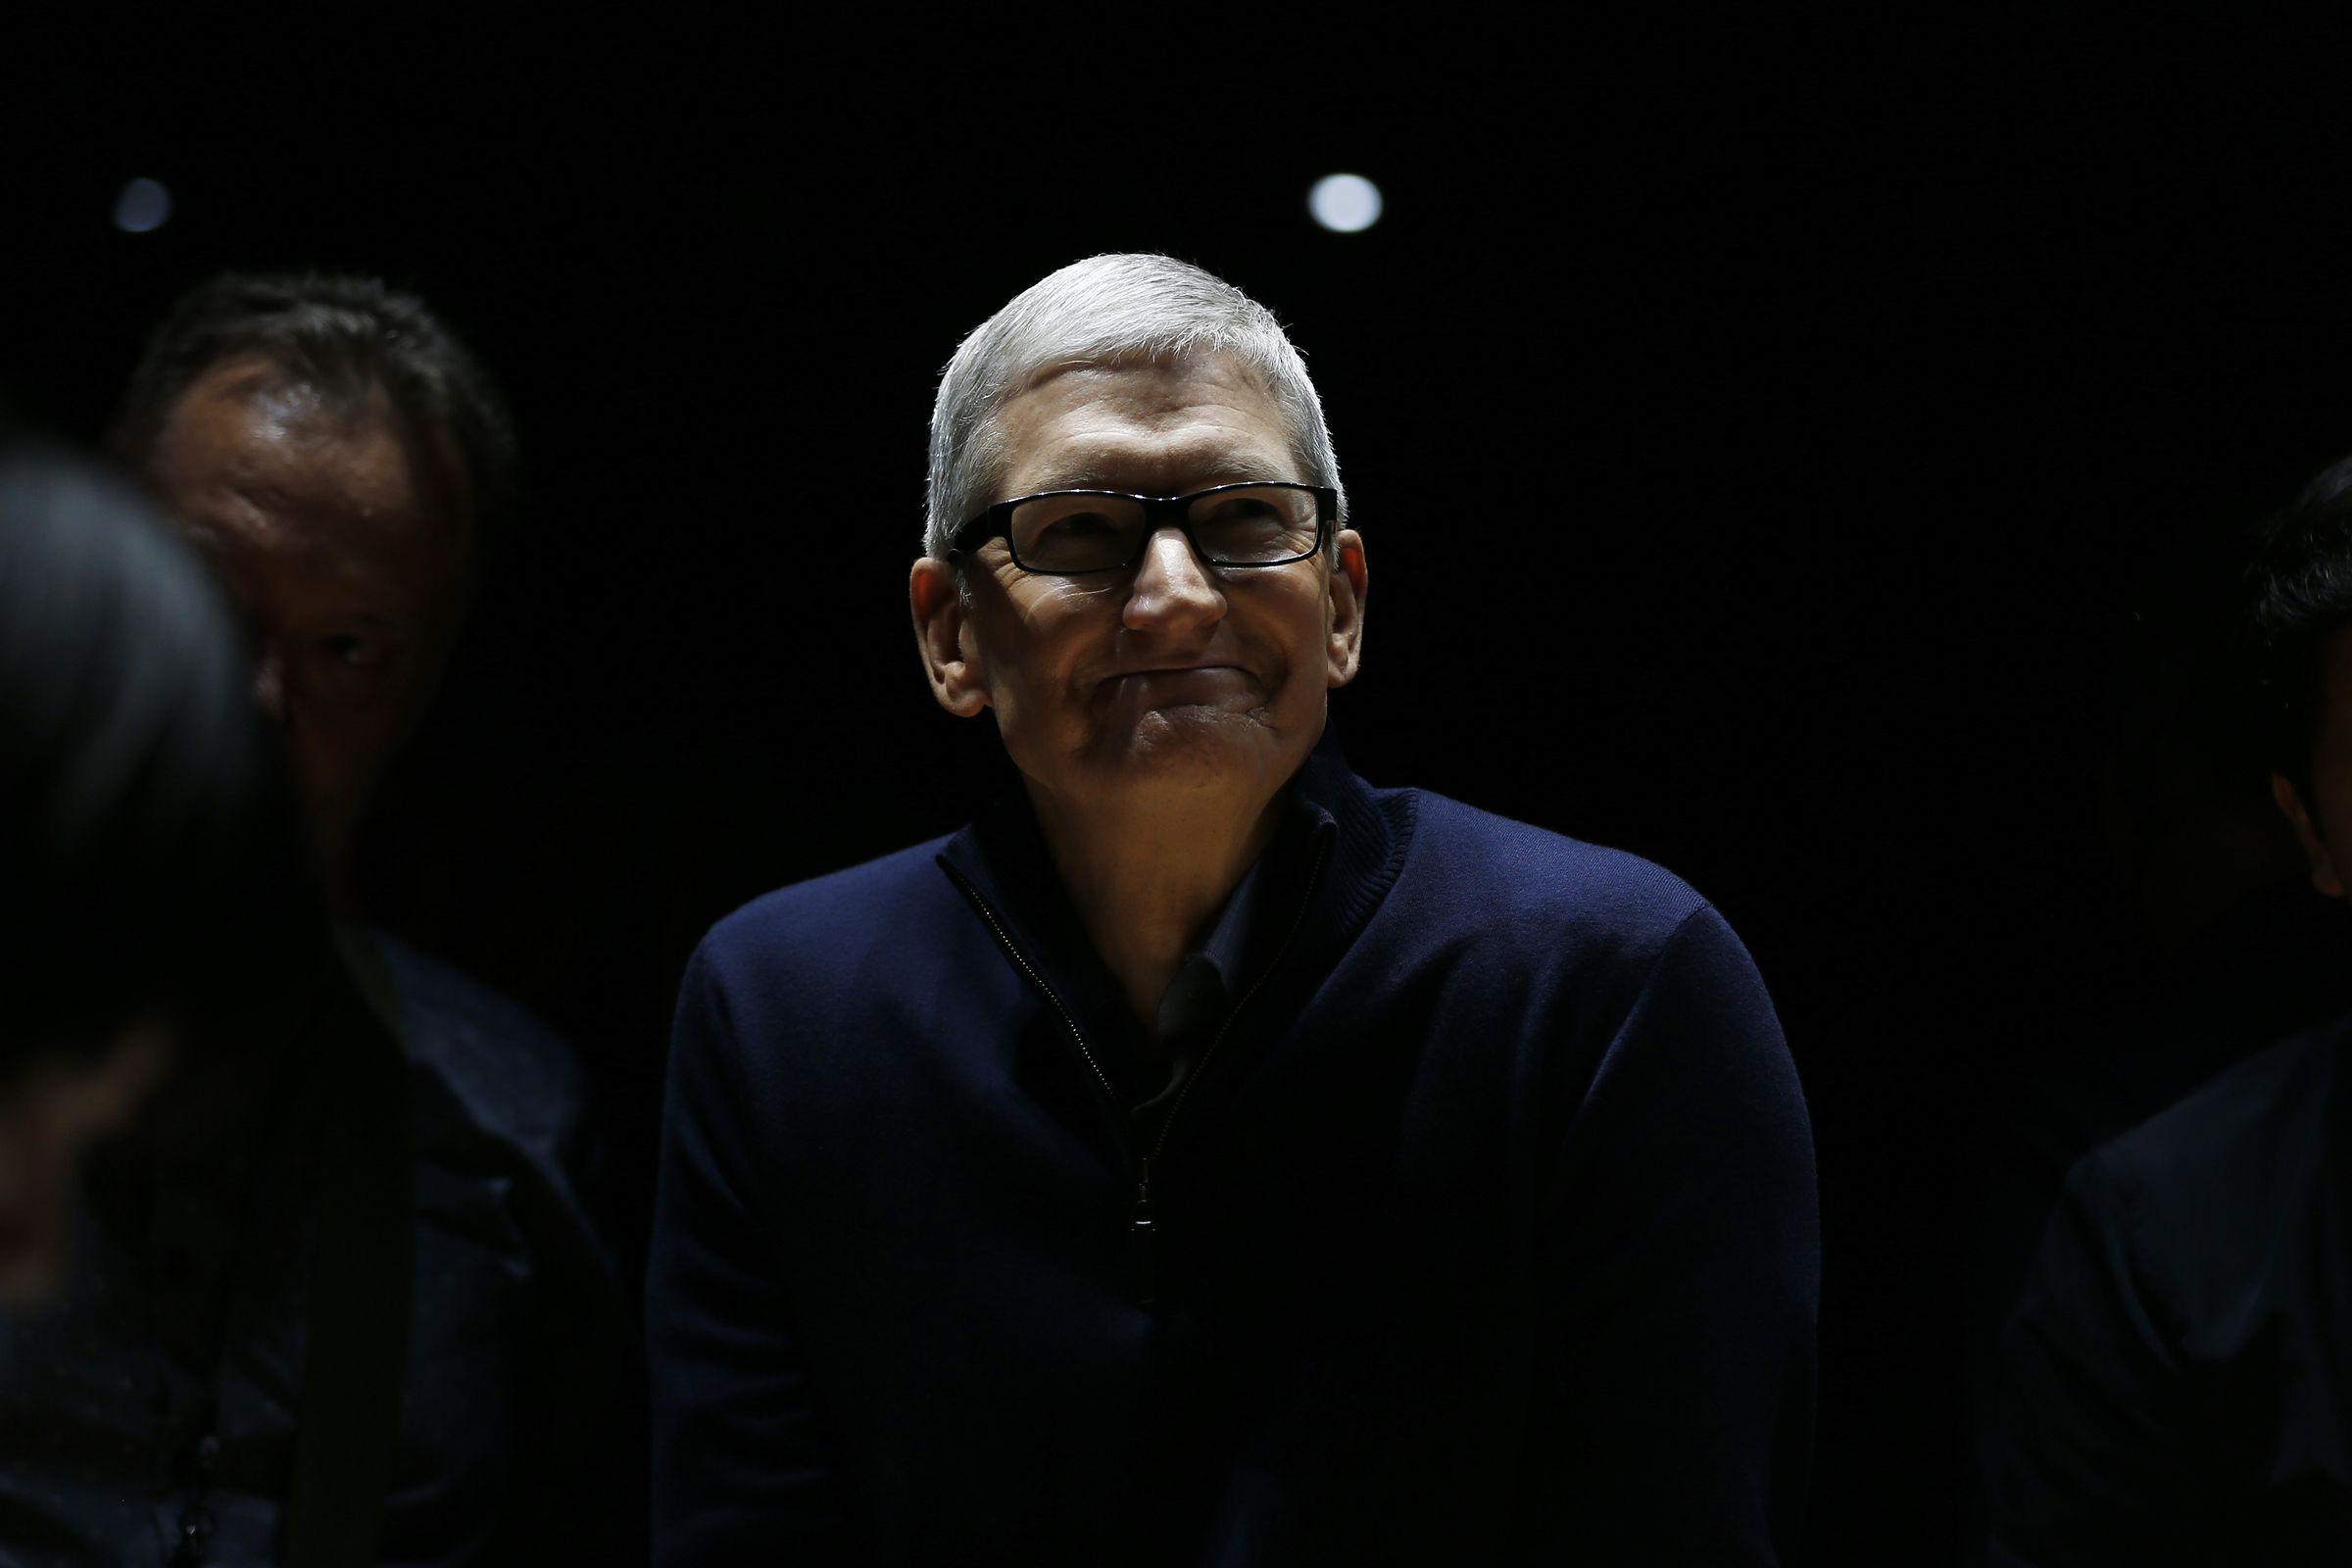 Apple Holds Event To Announce New Products